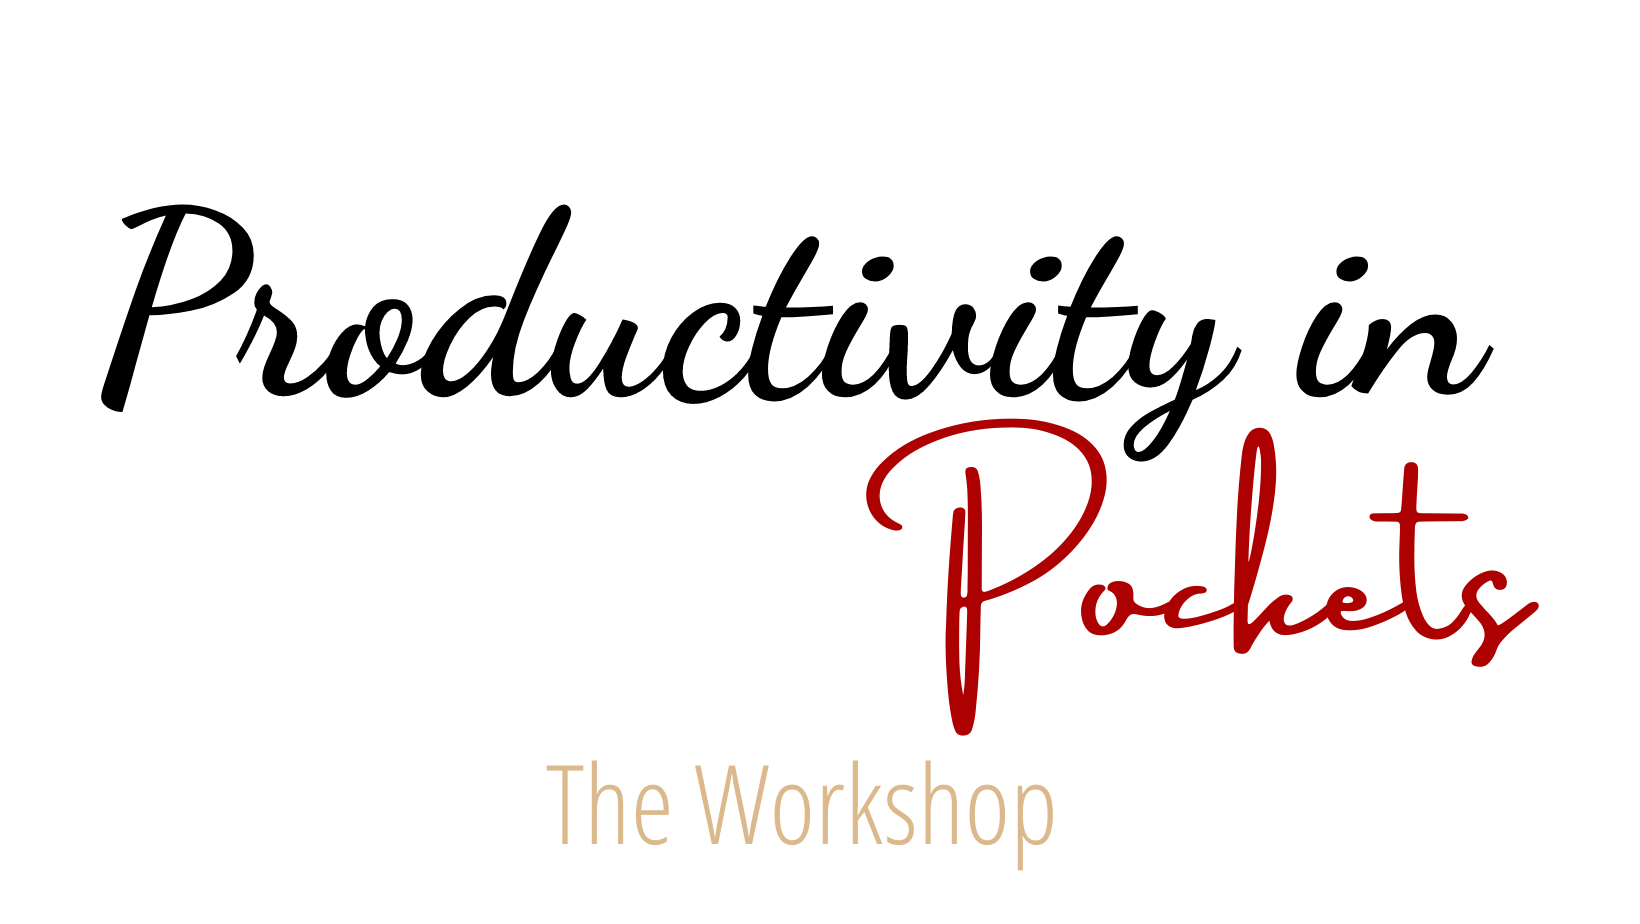 Productivity in Pockets The Workshop logo